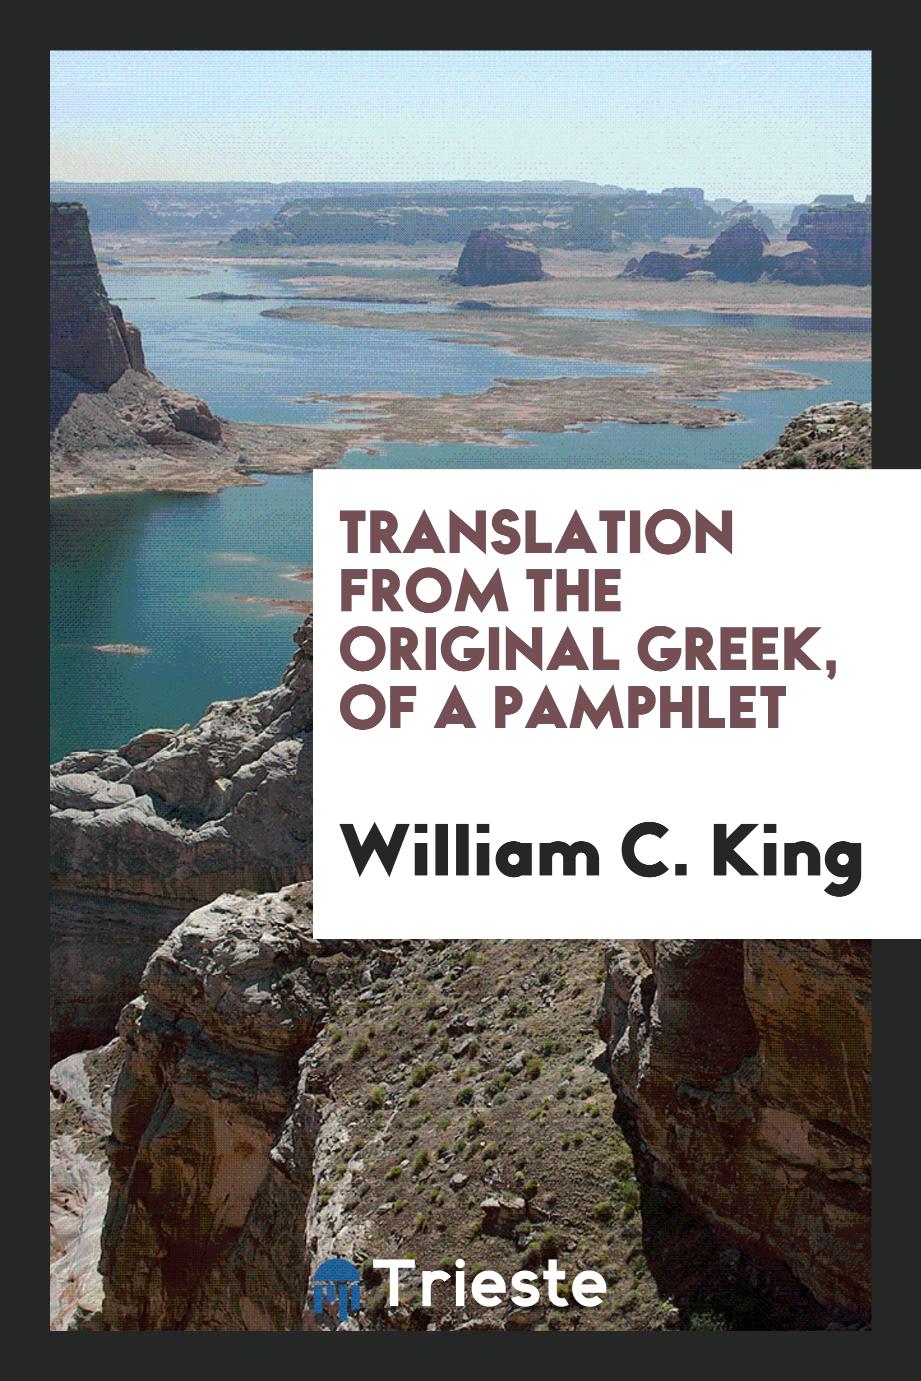 William C. King - Translation from the Original Greek, of a Pamphlet